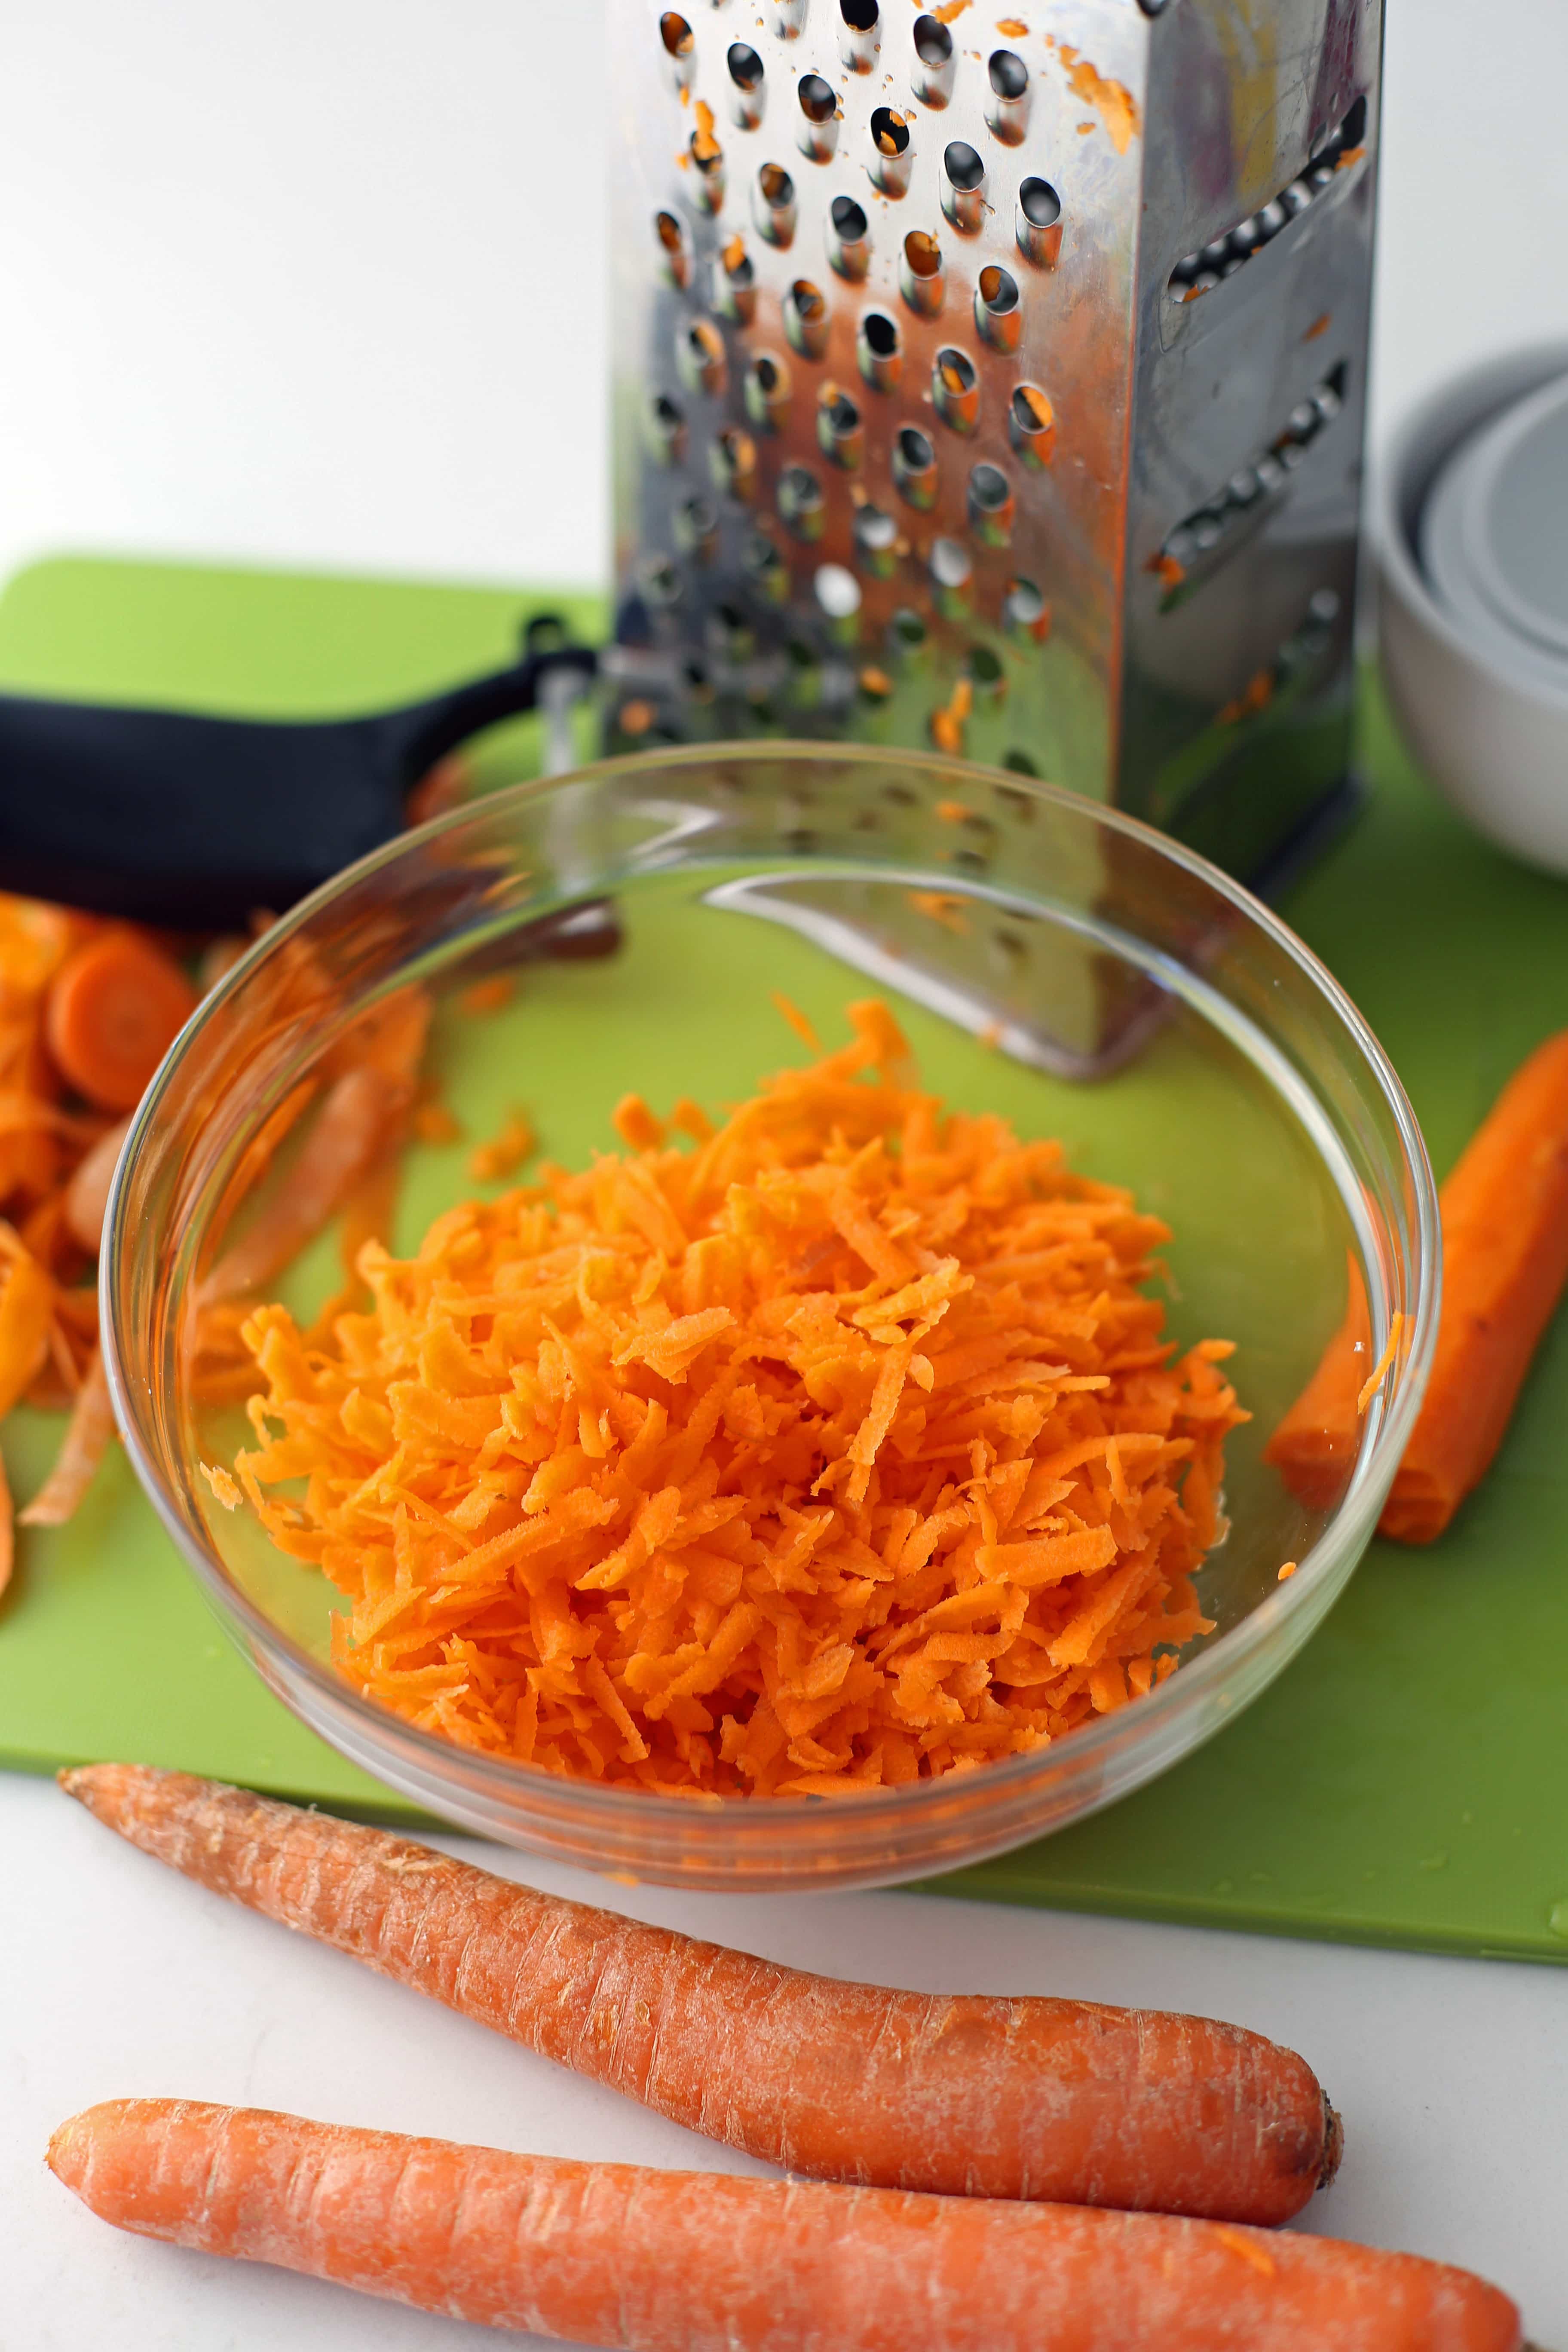 A glass bowl containing grated carrots, carrots, and metal shredder on a green cutting board.